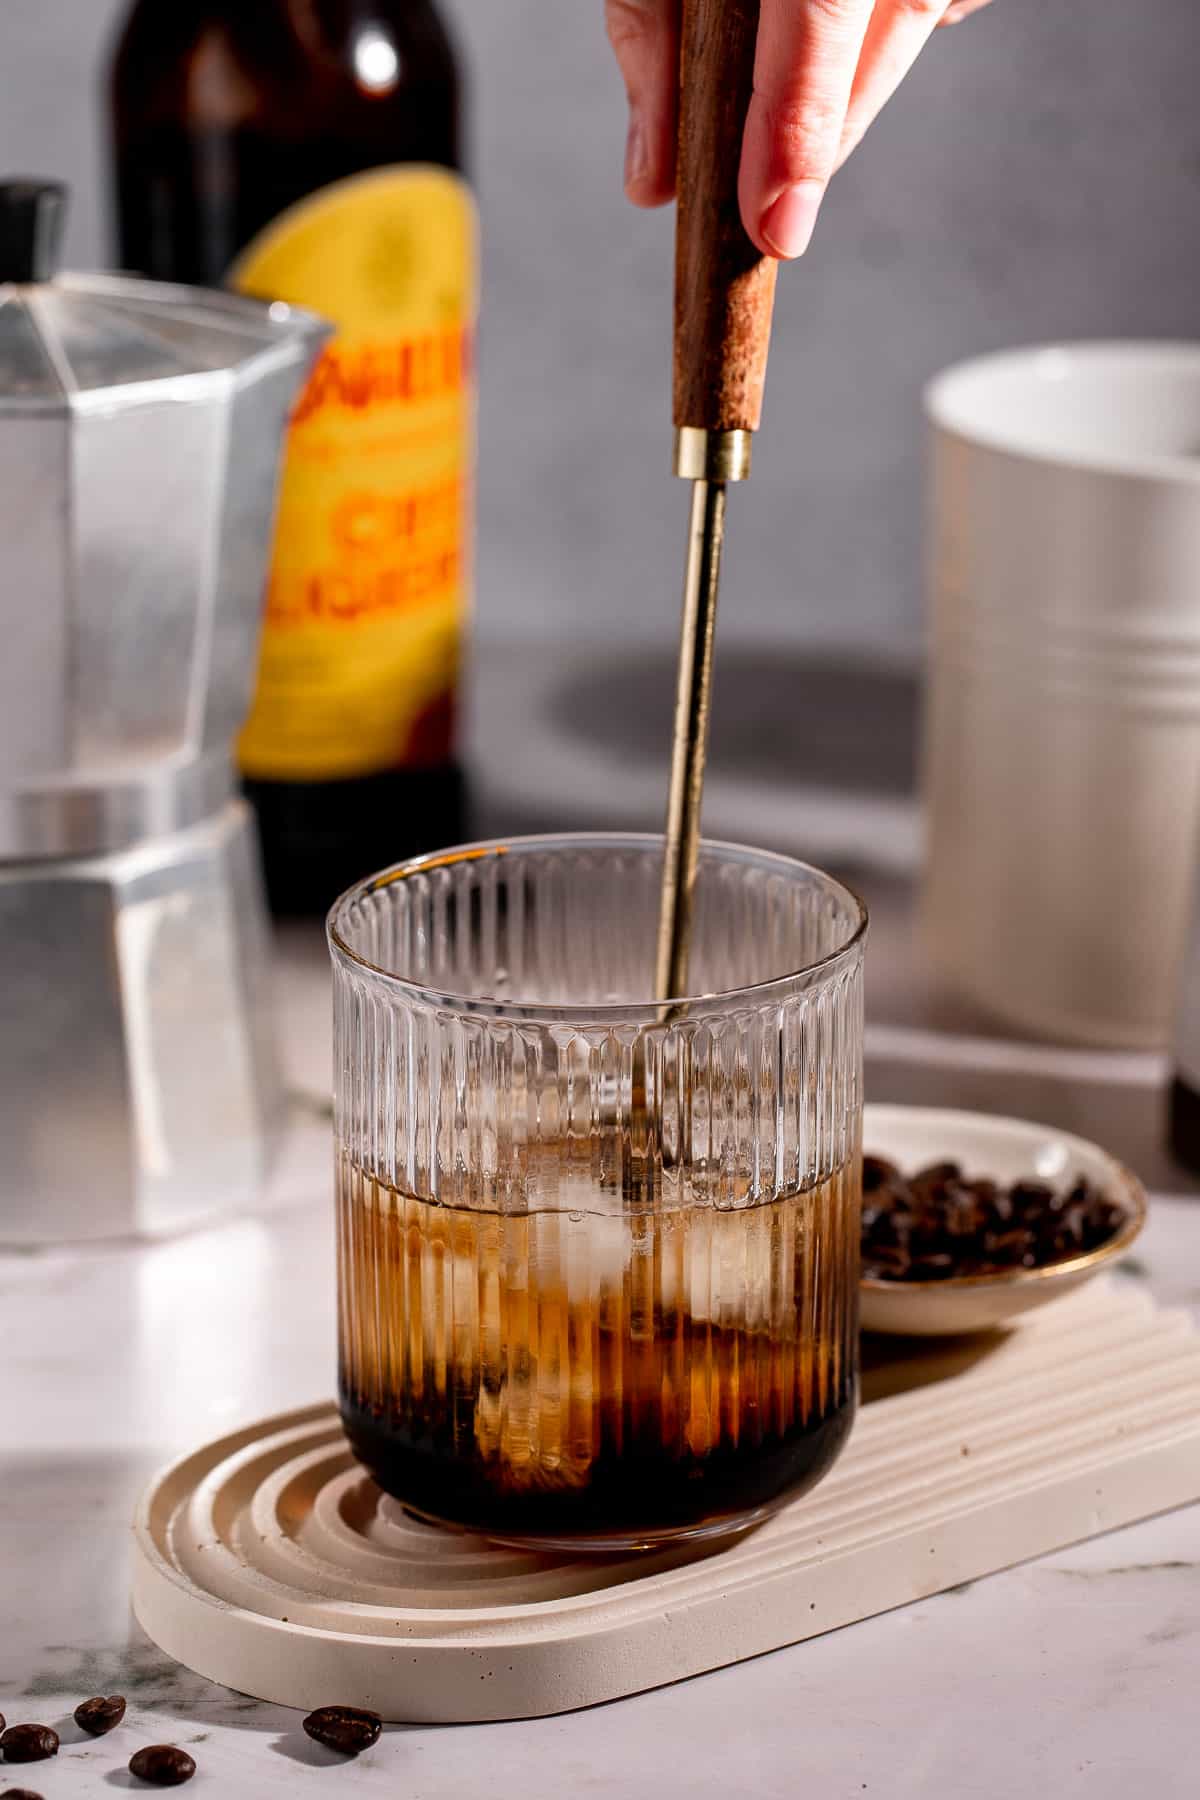 A spoon mixing together the ingredients for a White Russian Screwball Drink.